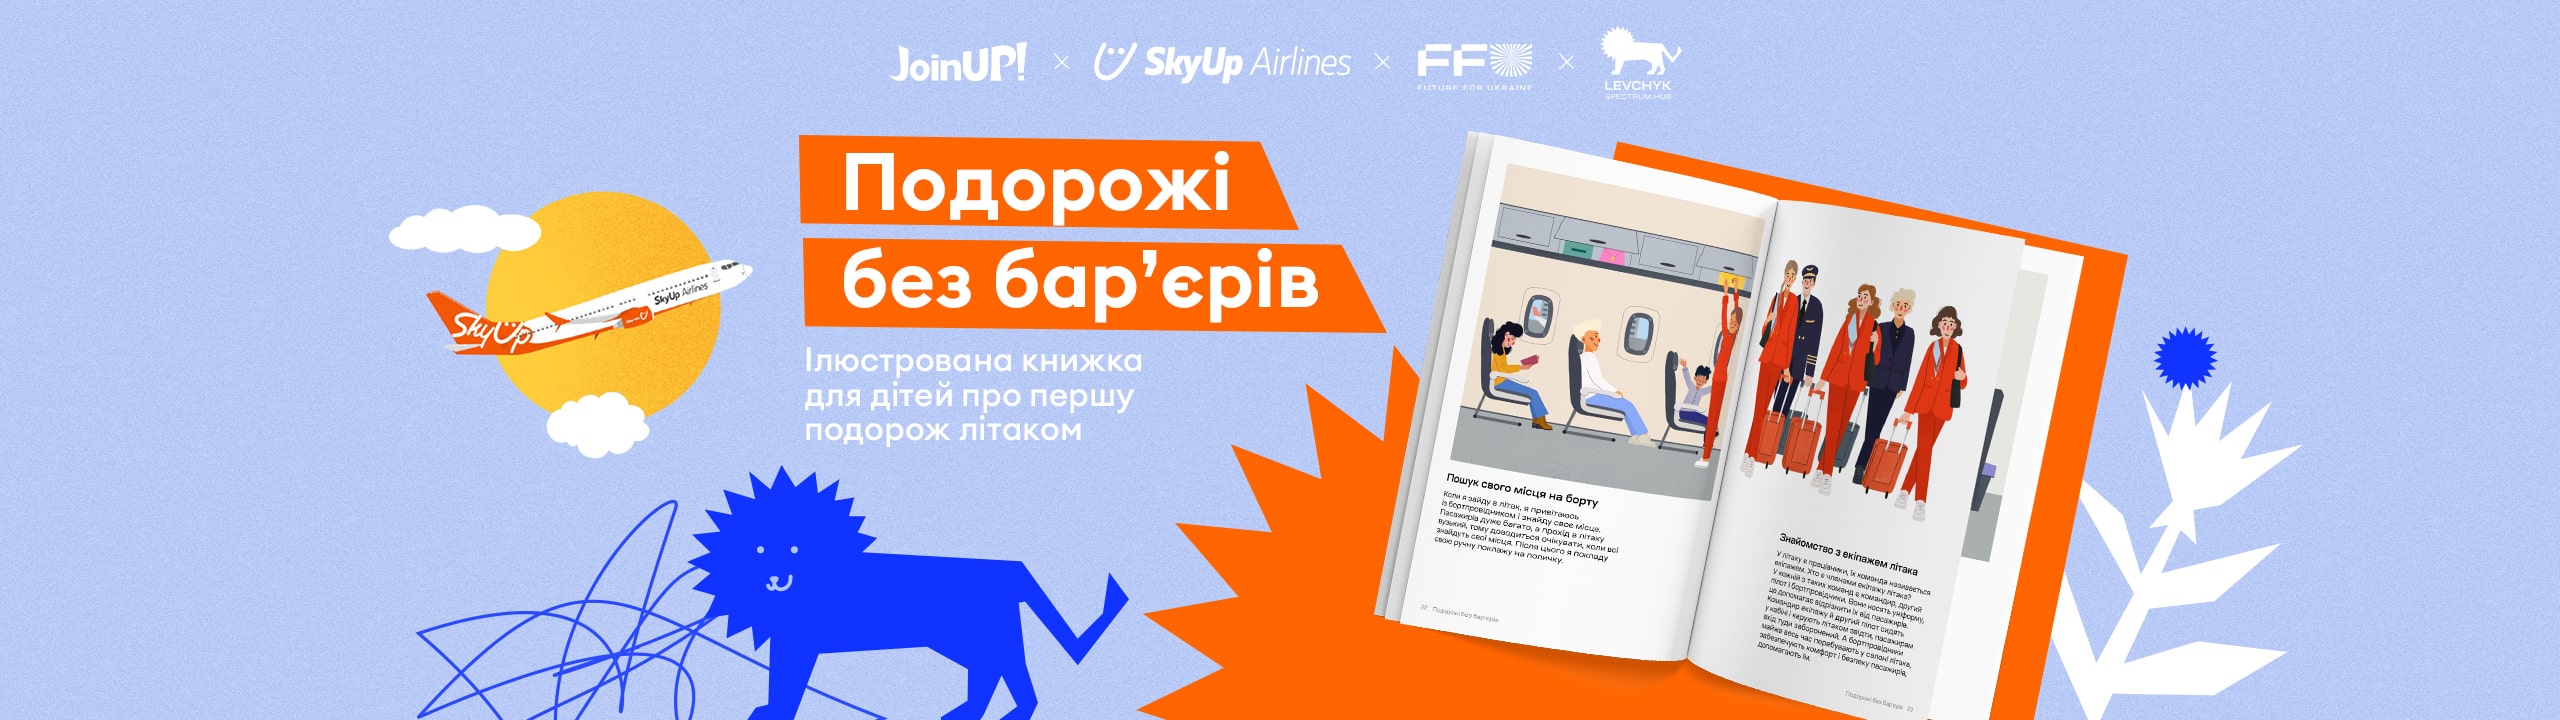 SkyUp, Join UP!, and LEVCHYK SPECTRUM HUB launched a children's book to help kids prepare for their first airplane trip